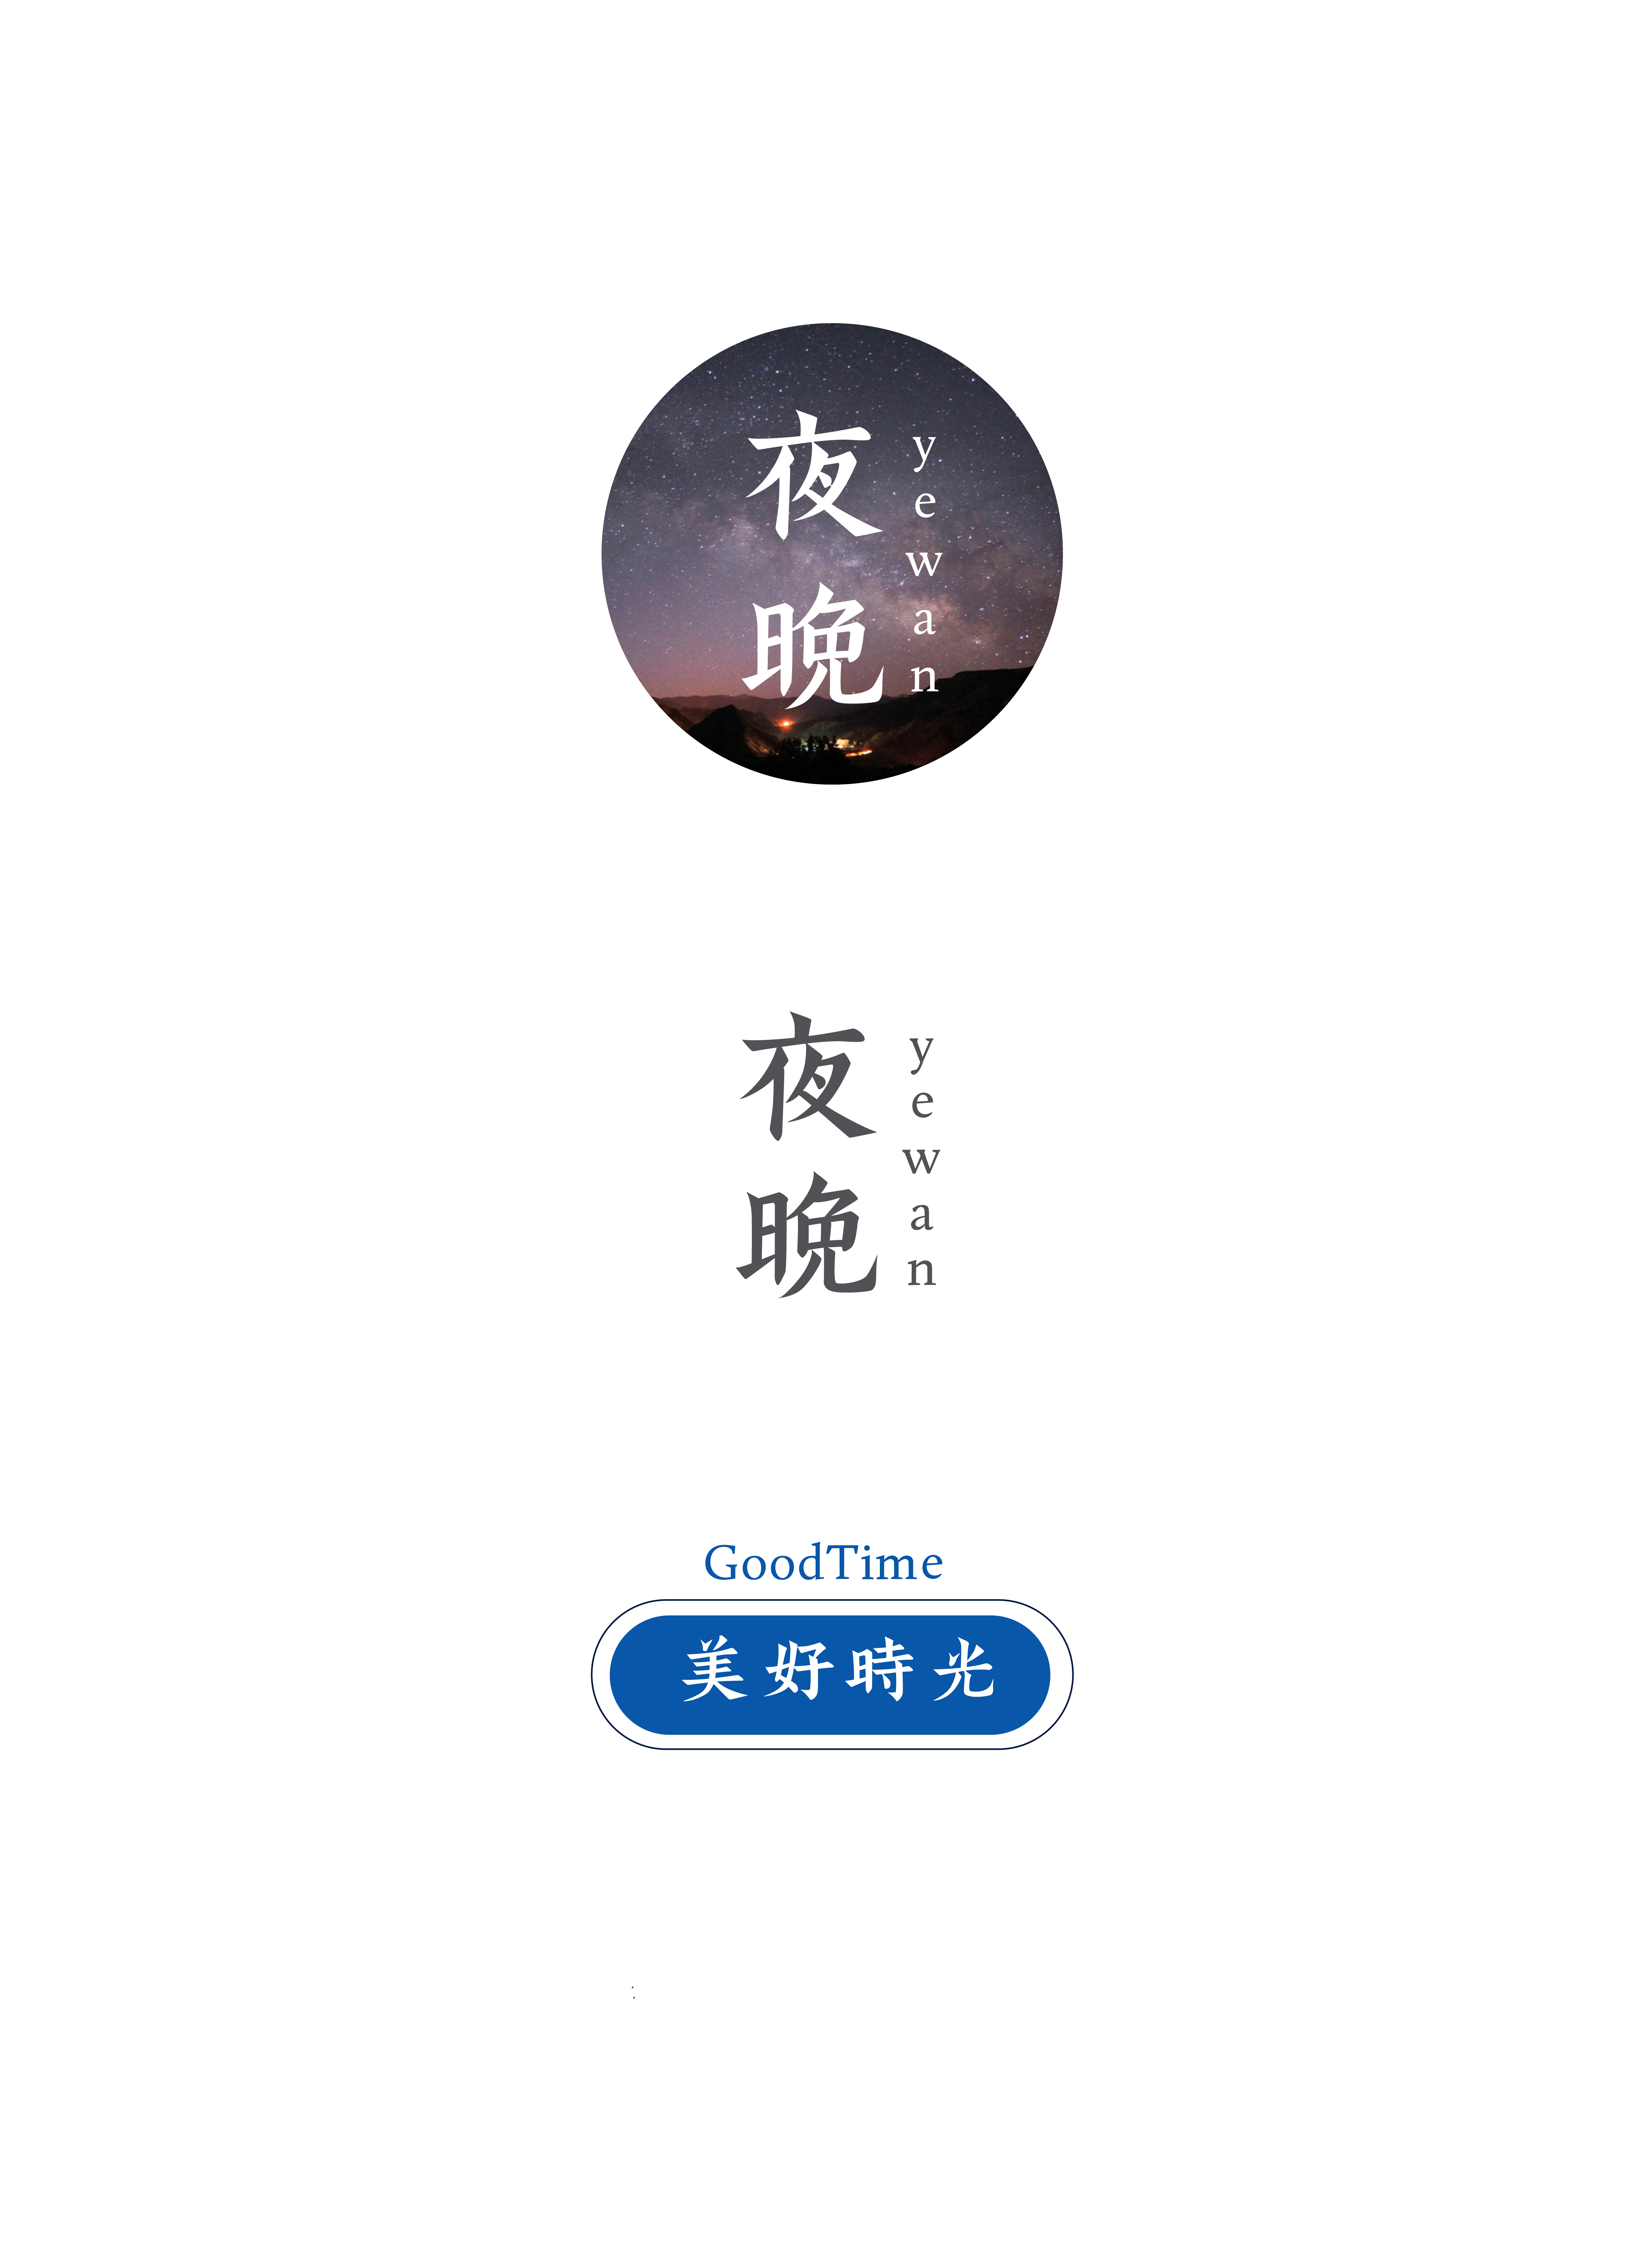 Here are the traditional Chinese characters you want.